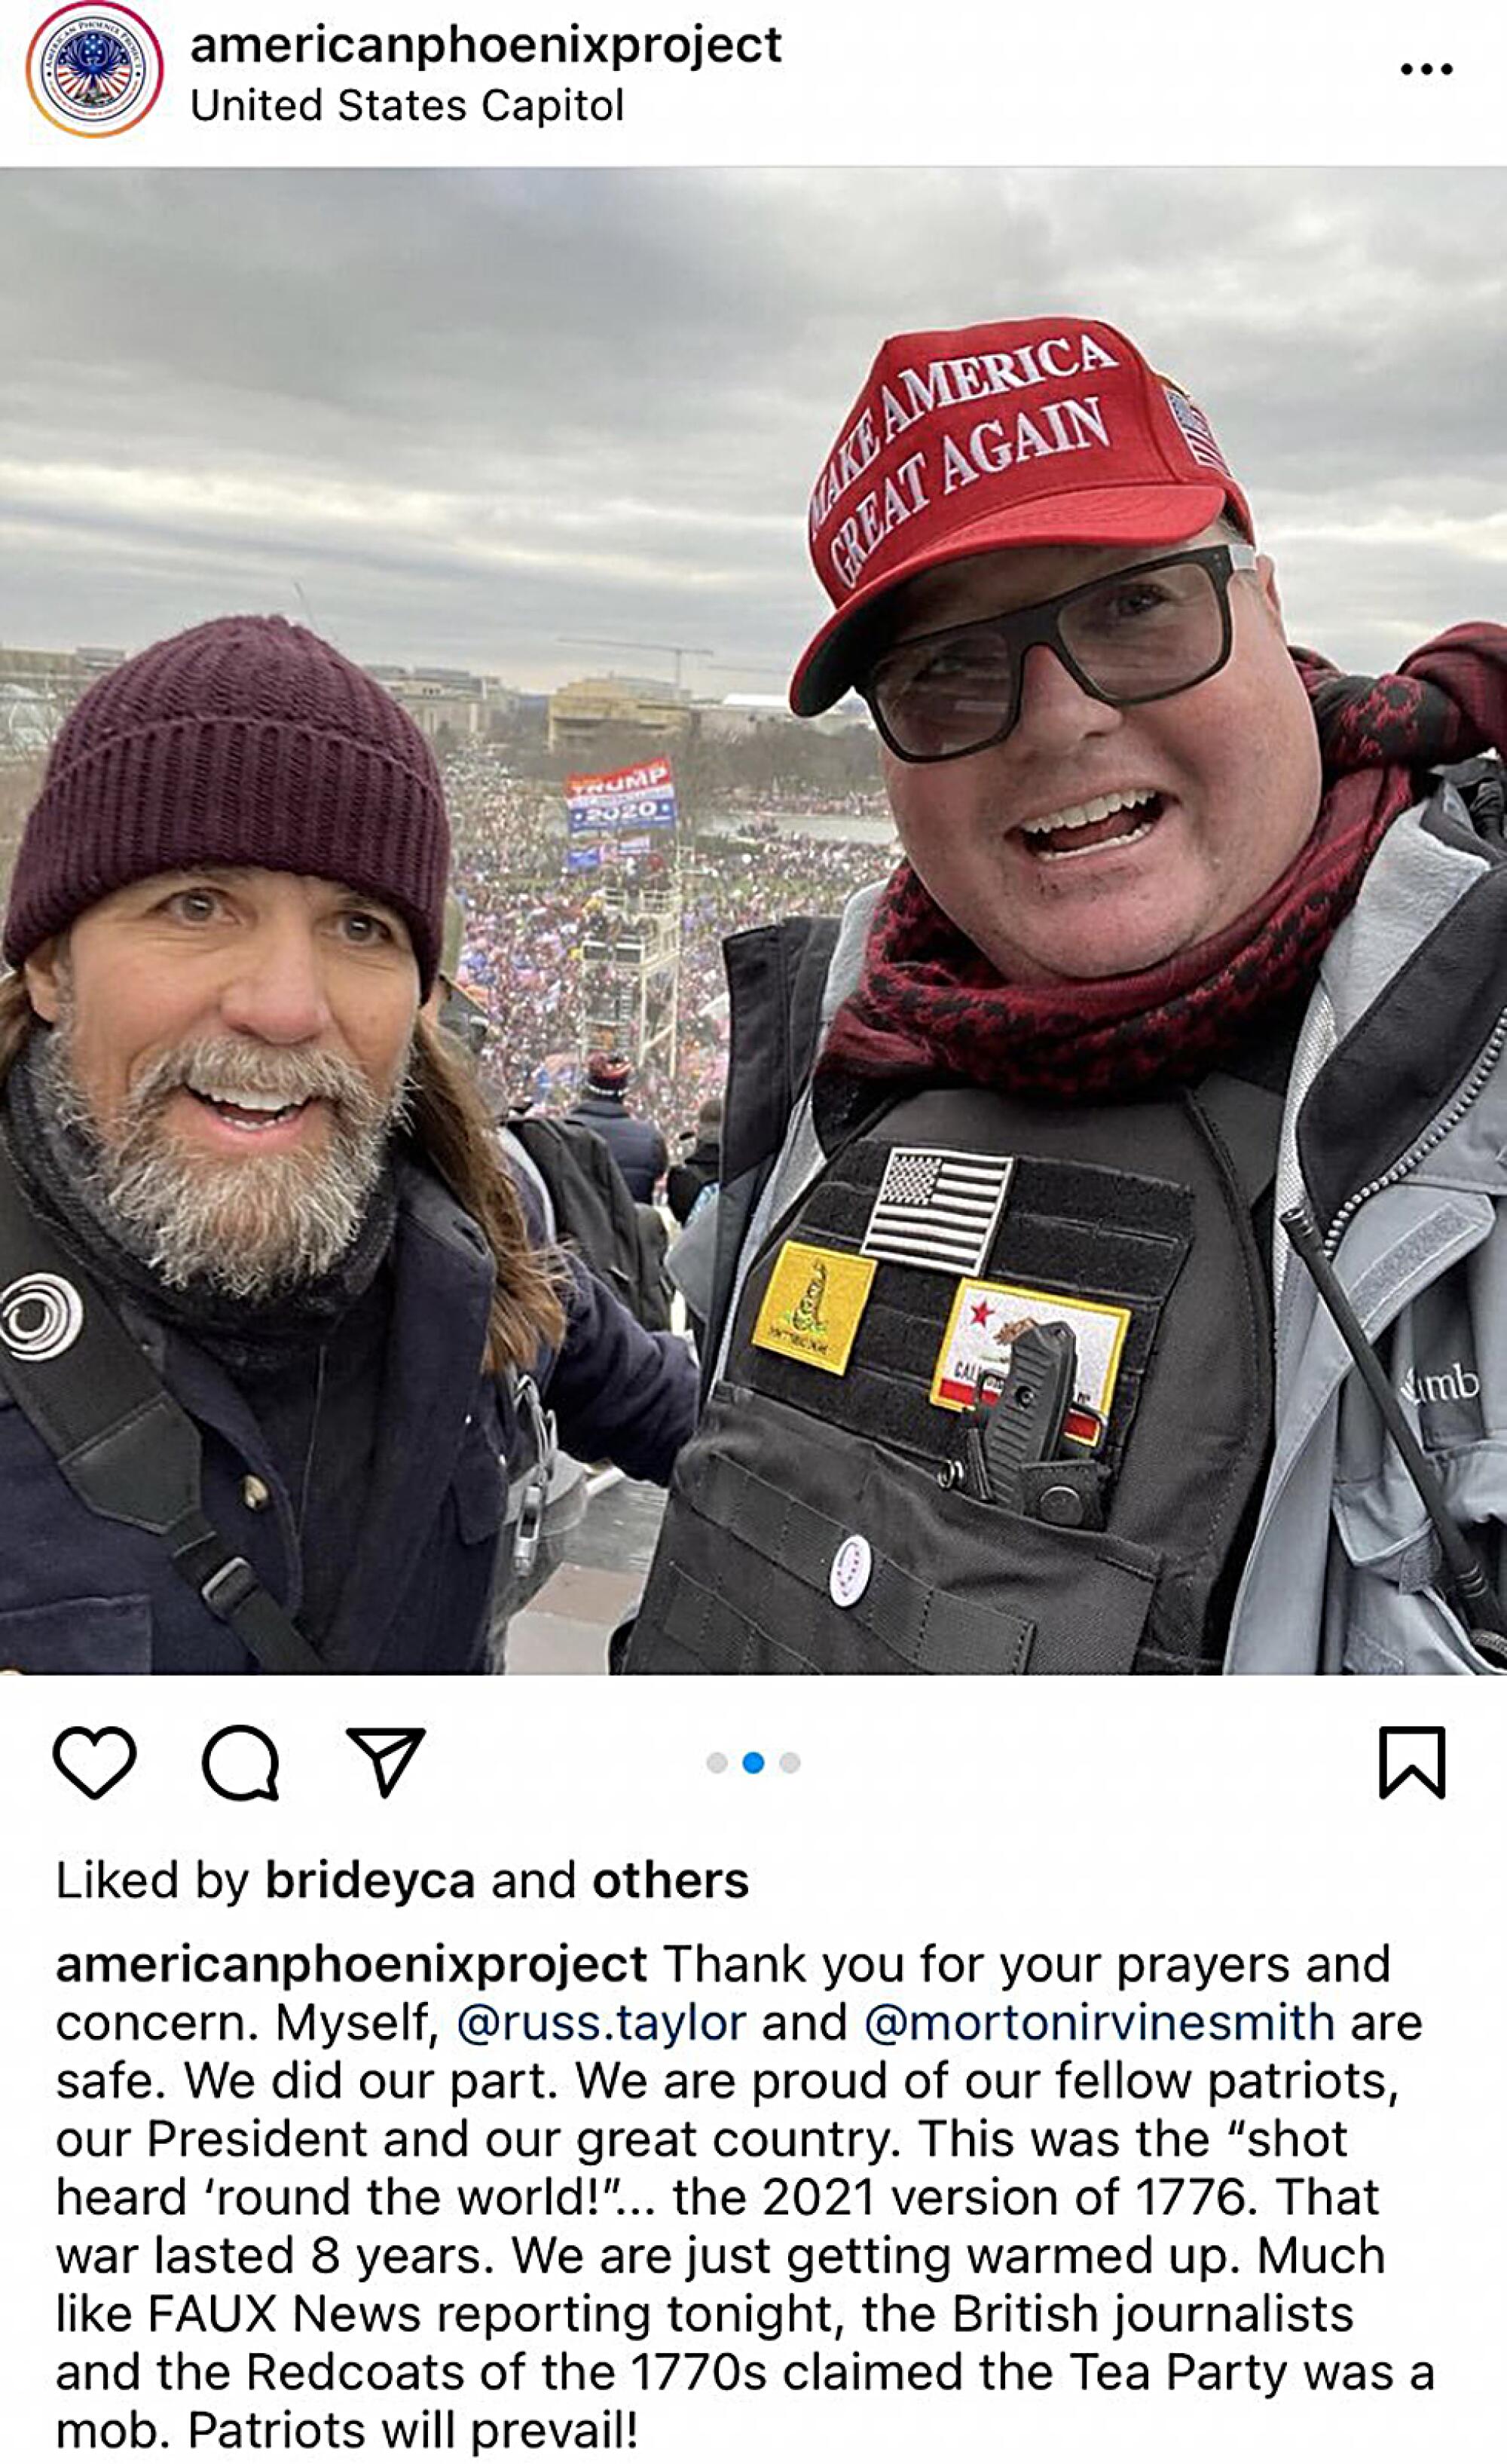 Two men in a selfie taken in front of a massive mob outside the U.S. Capitol building